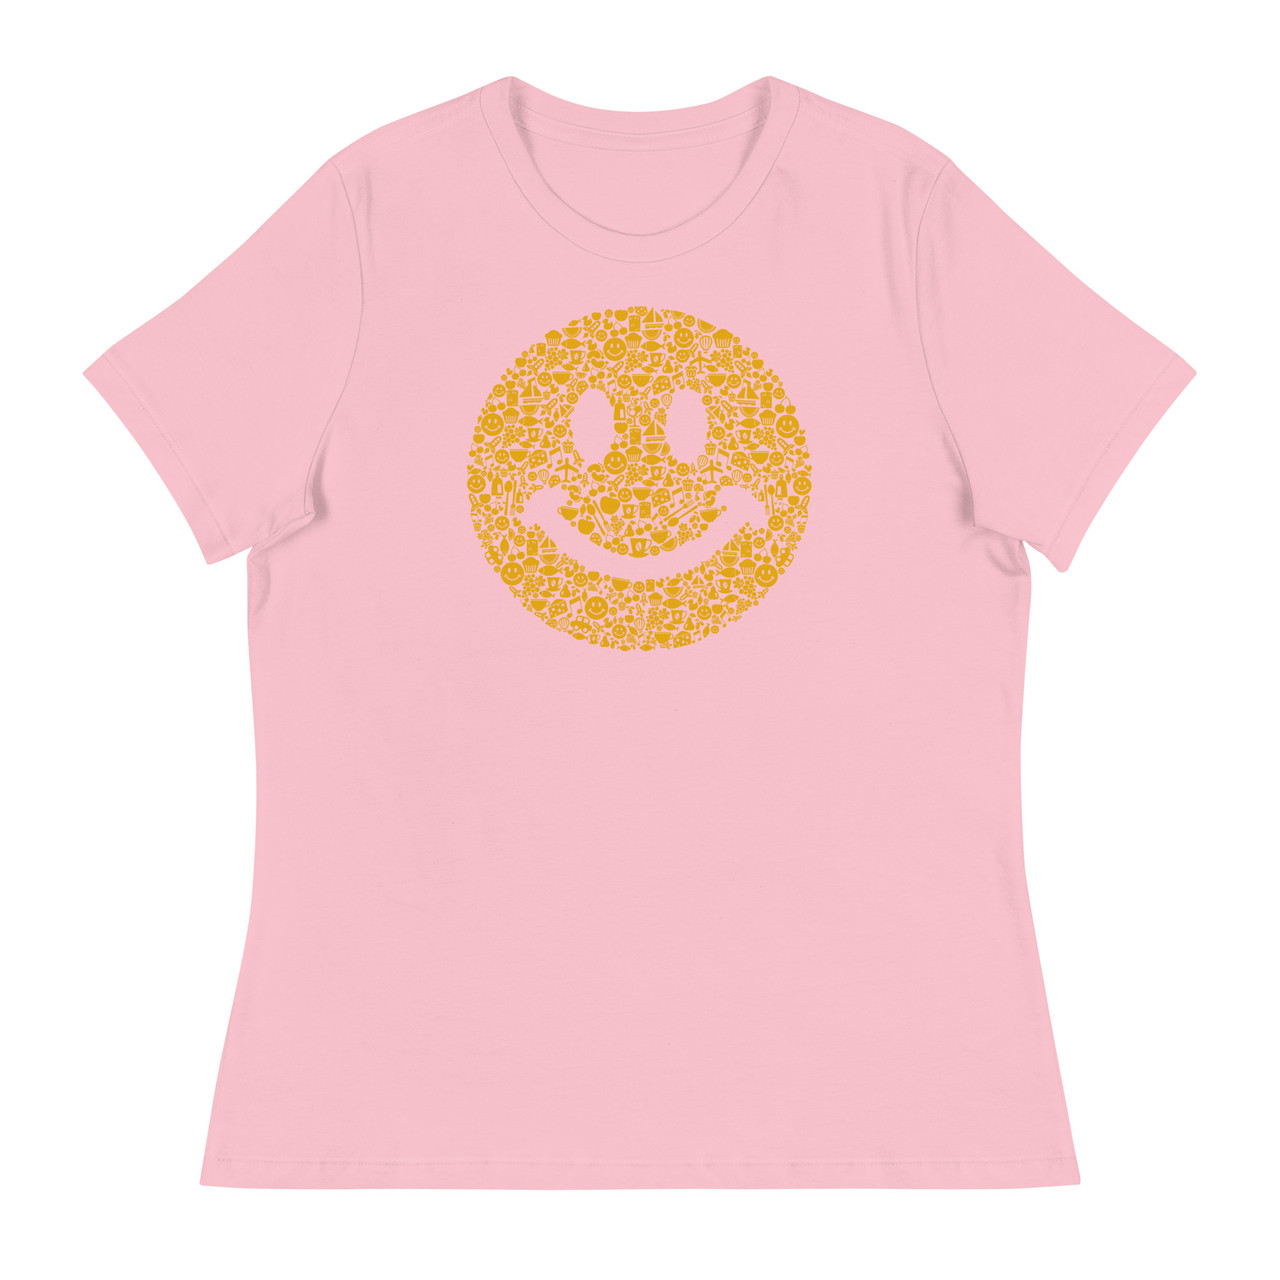 Smile Within A Smile Women's Relaxed T-Shirt - Bella + Canvas 6400 